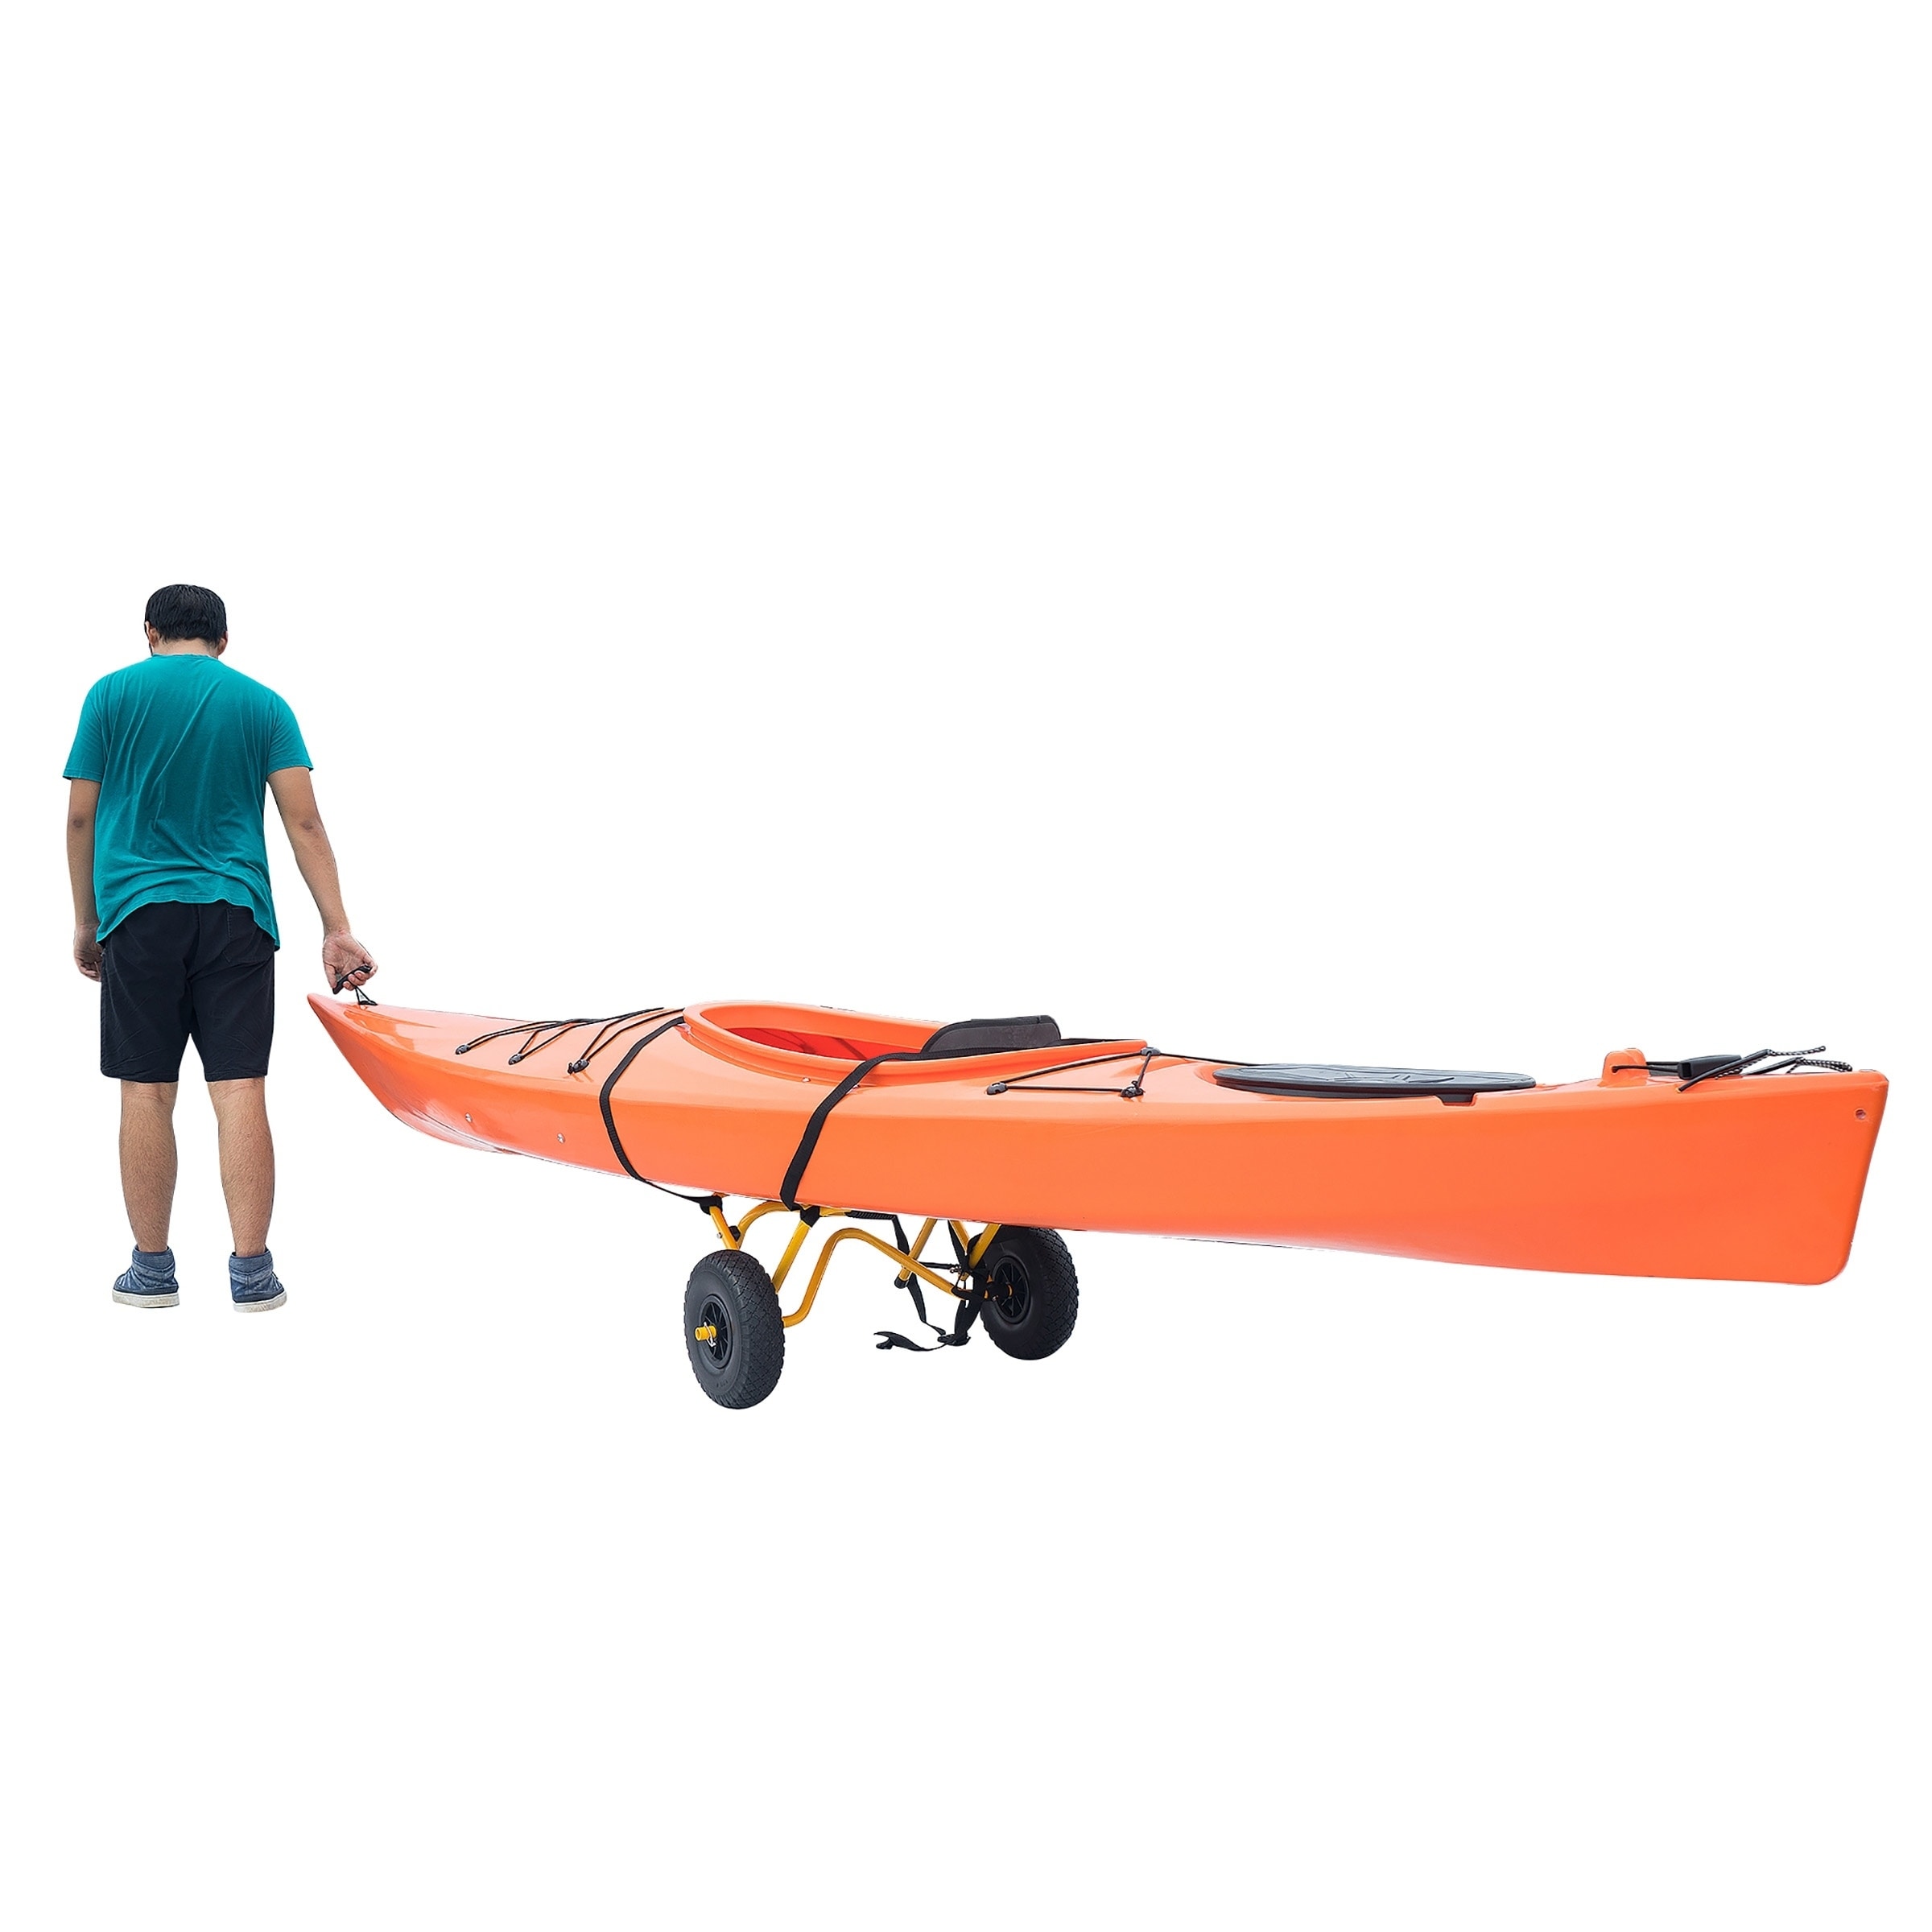 Kayak Cart – Canoe Dolly with Airless Tires, Aluminum Frame, and